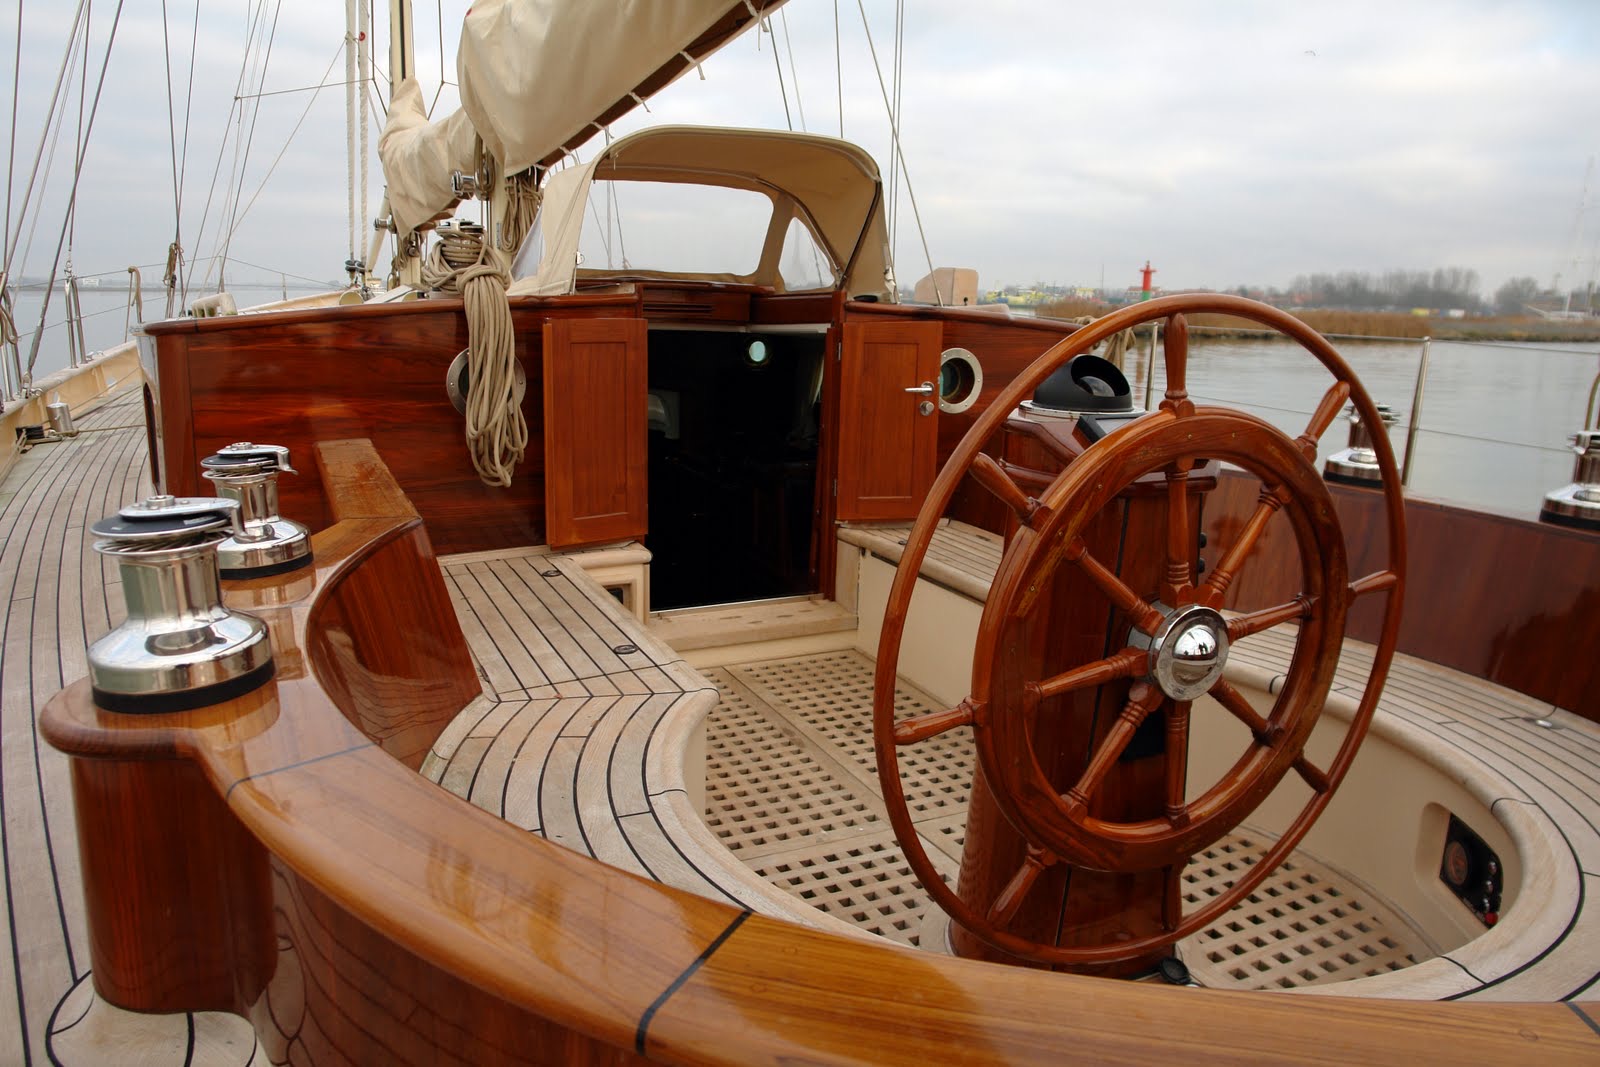 This picture shows the main deck of the lifting keel, schooner rigged yacht, ‘Ahoy’. Designed by the renowned Dutch naval architect Olivier Van Meer, she is a truly go anywhere vessel that will look after a new owner seeking adventure and exploring new sailing grounds